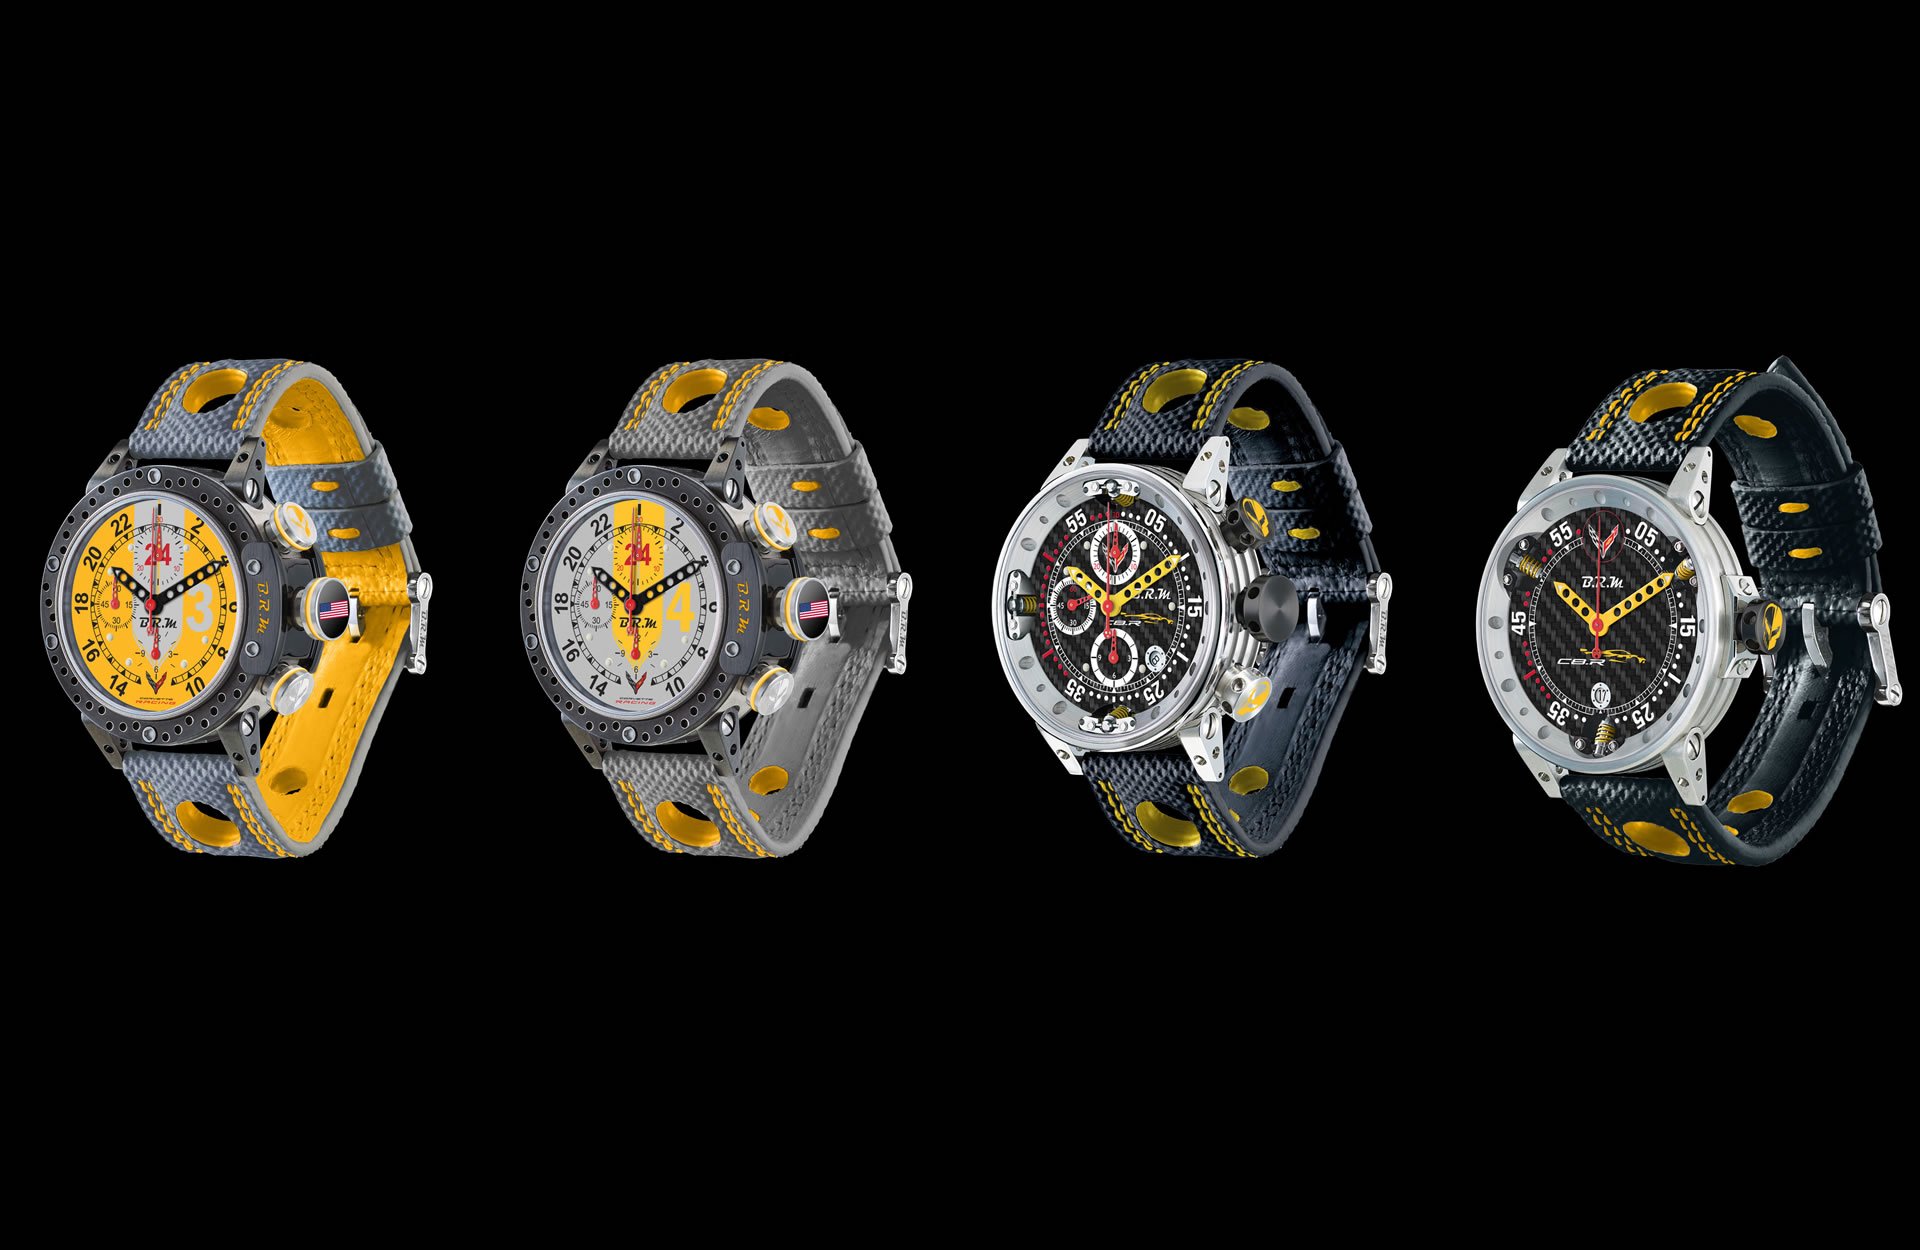 Introducing the new BRM Corvette® C8.R Collection